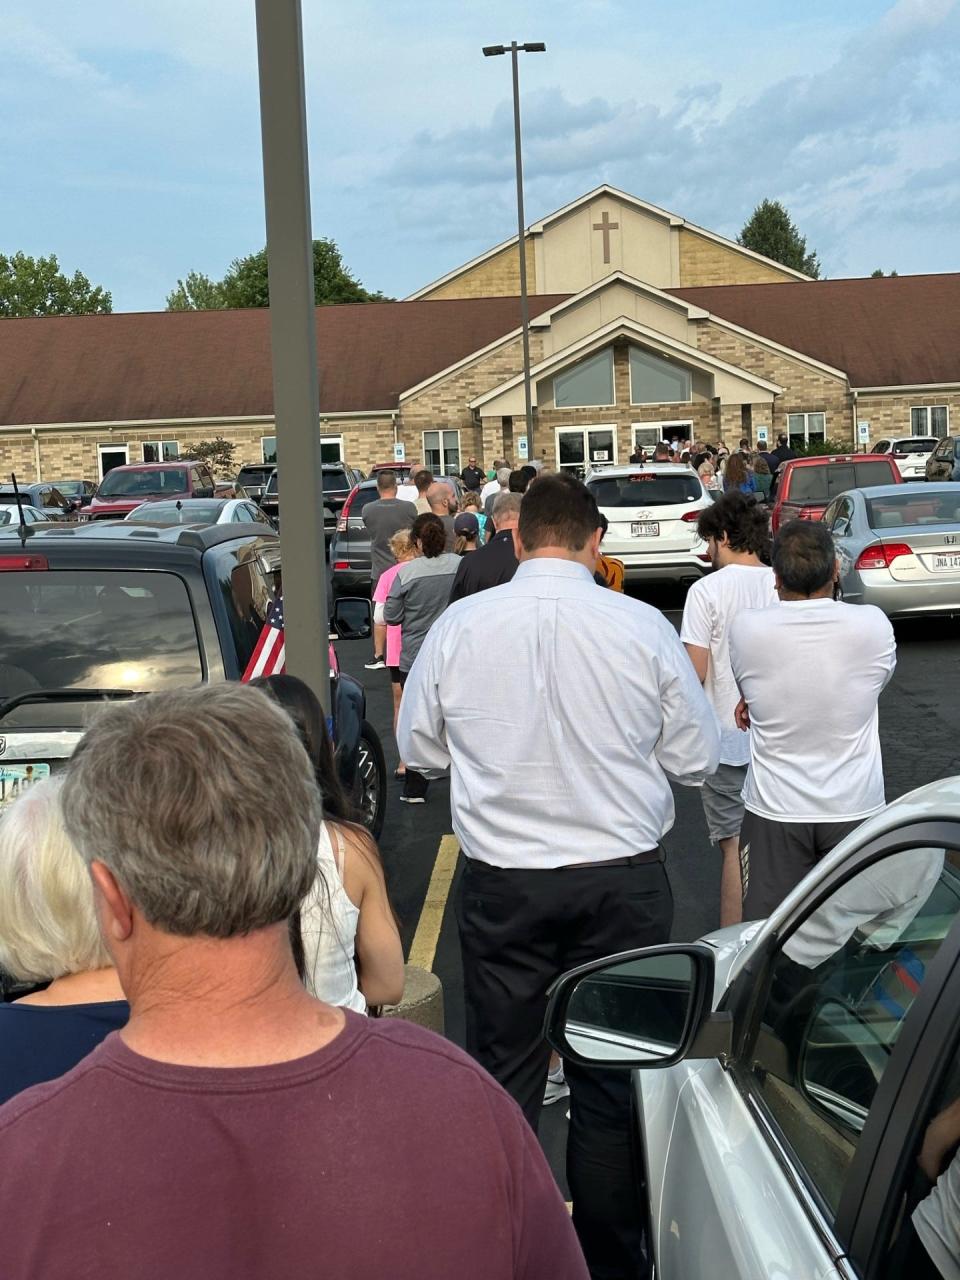 Jackson Township voter Nick Spanakis submitted this picture that shows the line of voters waiting to vote on Issue 1 around 6:30 p.m. Tuesday at Crosspoint United Methodist Church on Portage Street NW in Jackson Township.